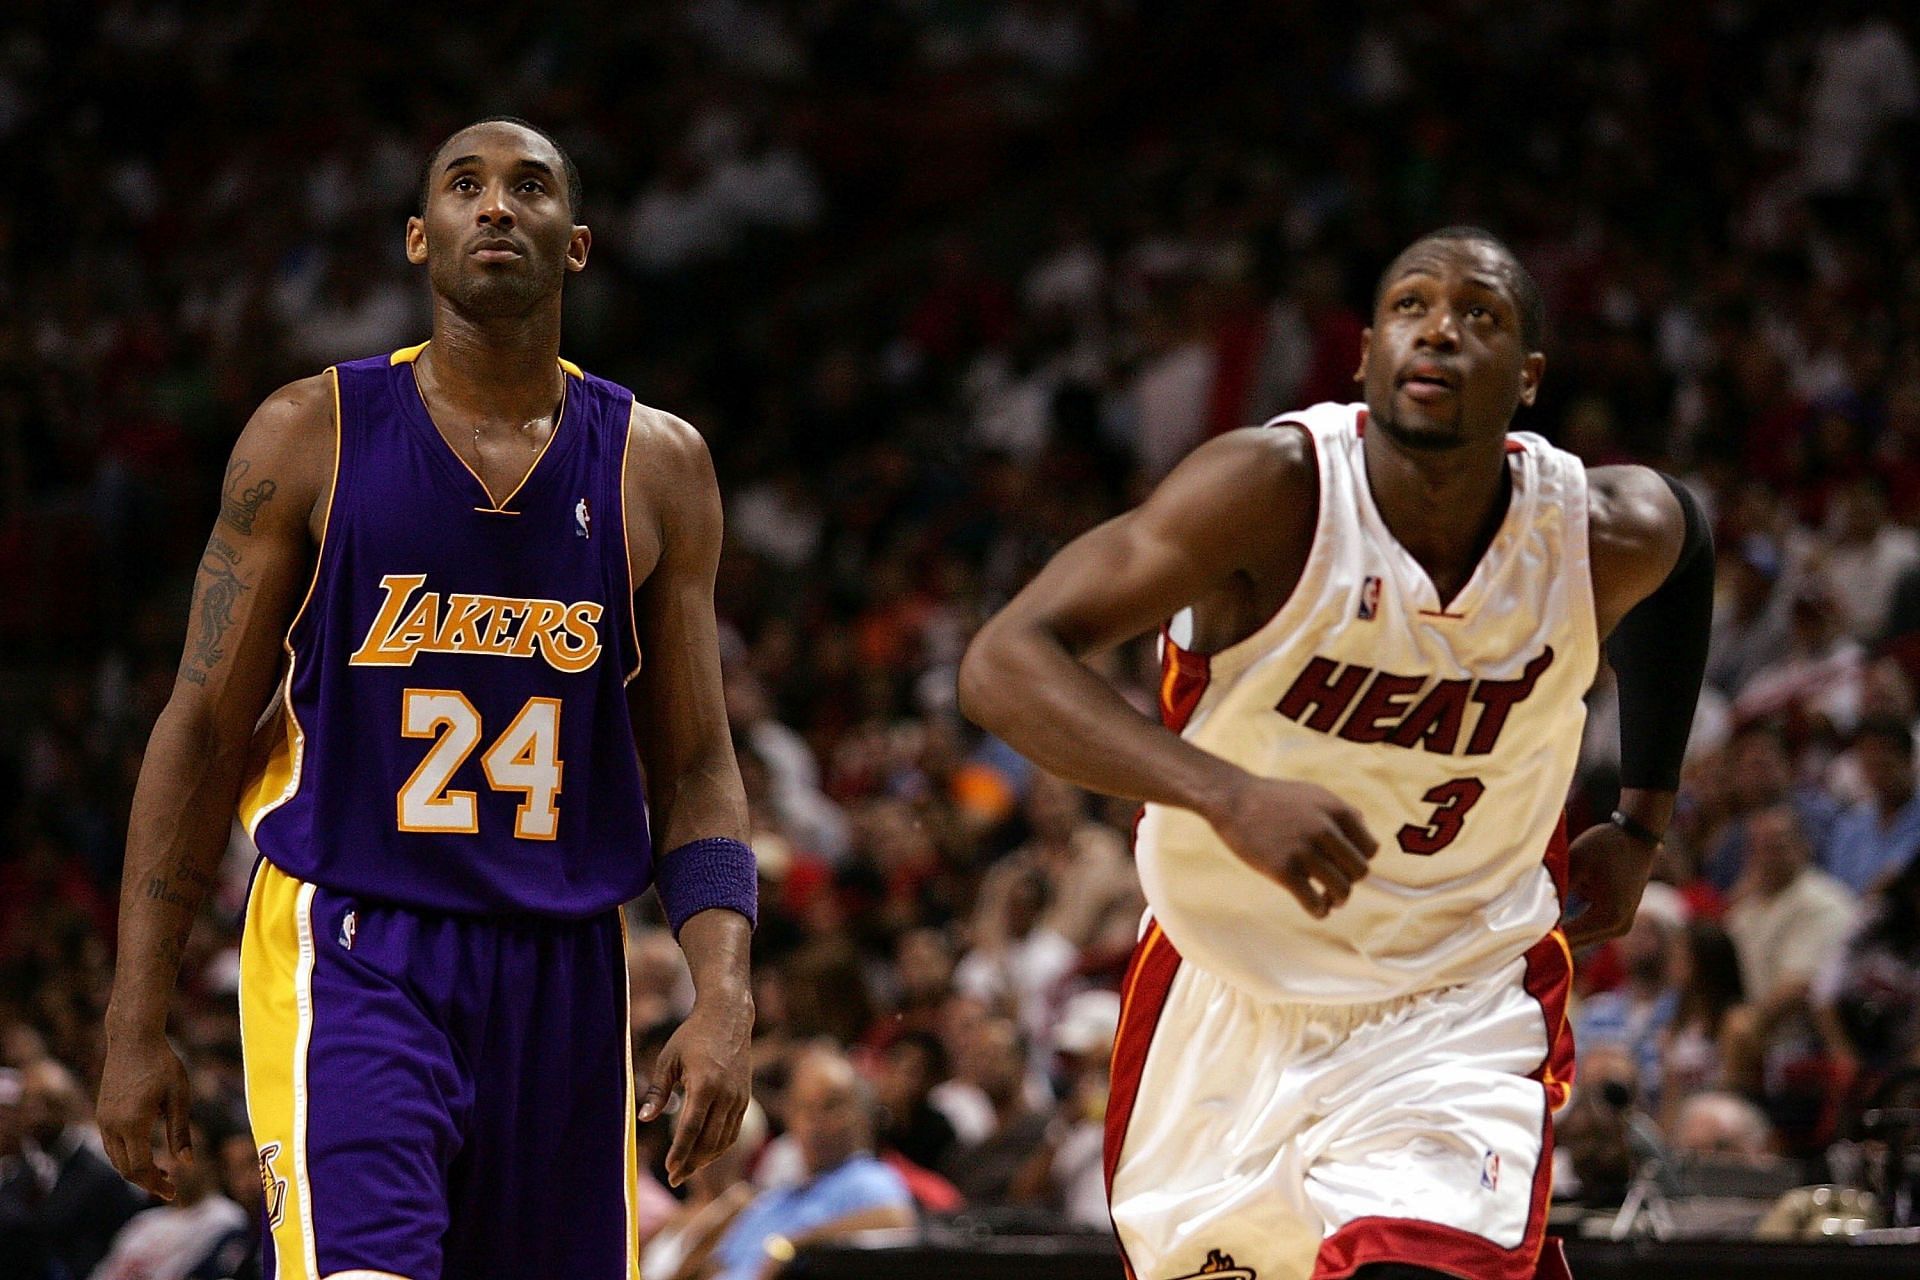 Dwyane Wade of the Miami heat against Kobe Bryant (left) of the LA Lakers in 2006